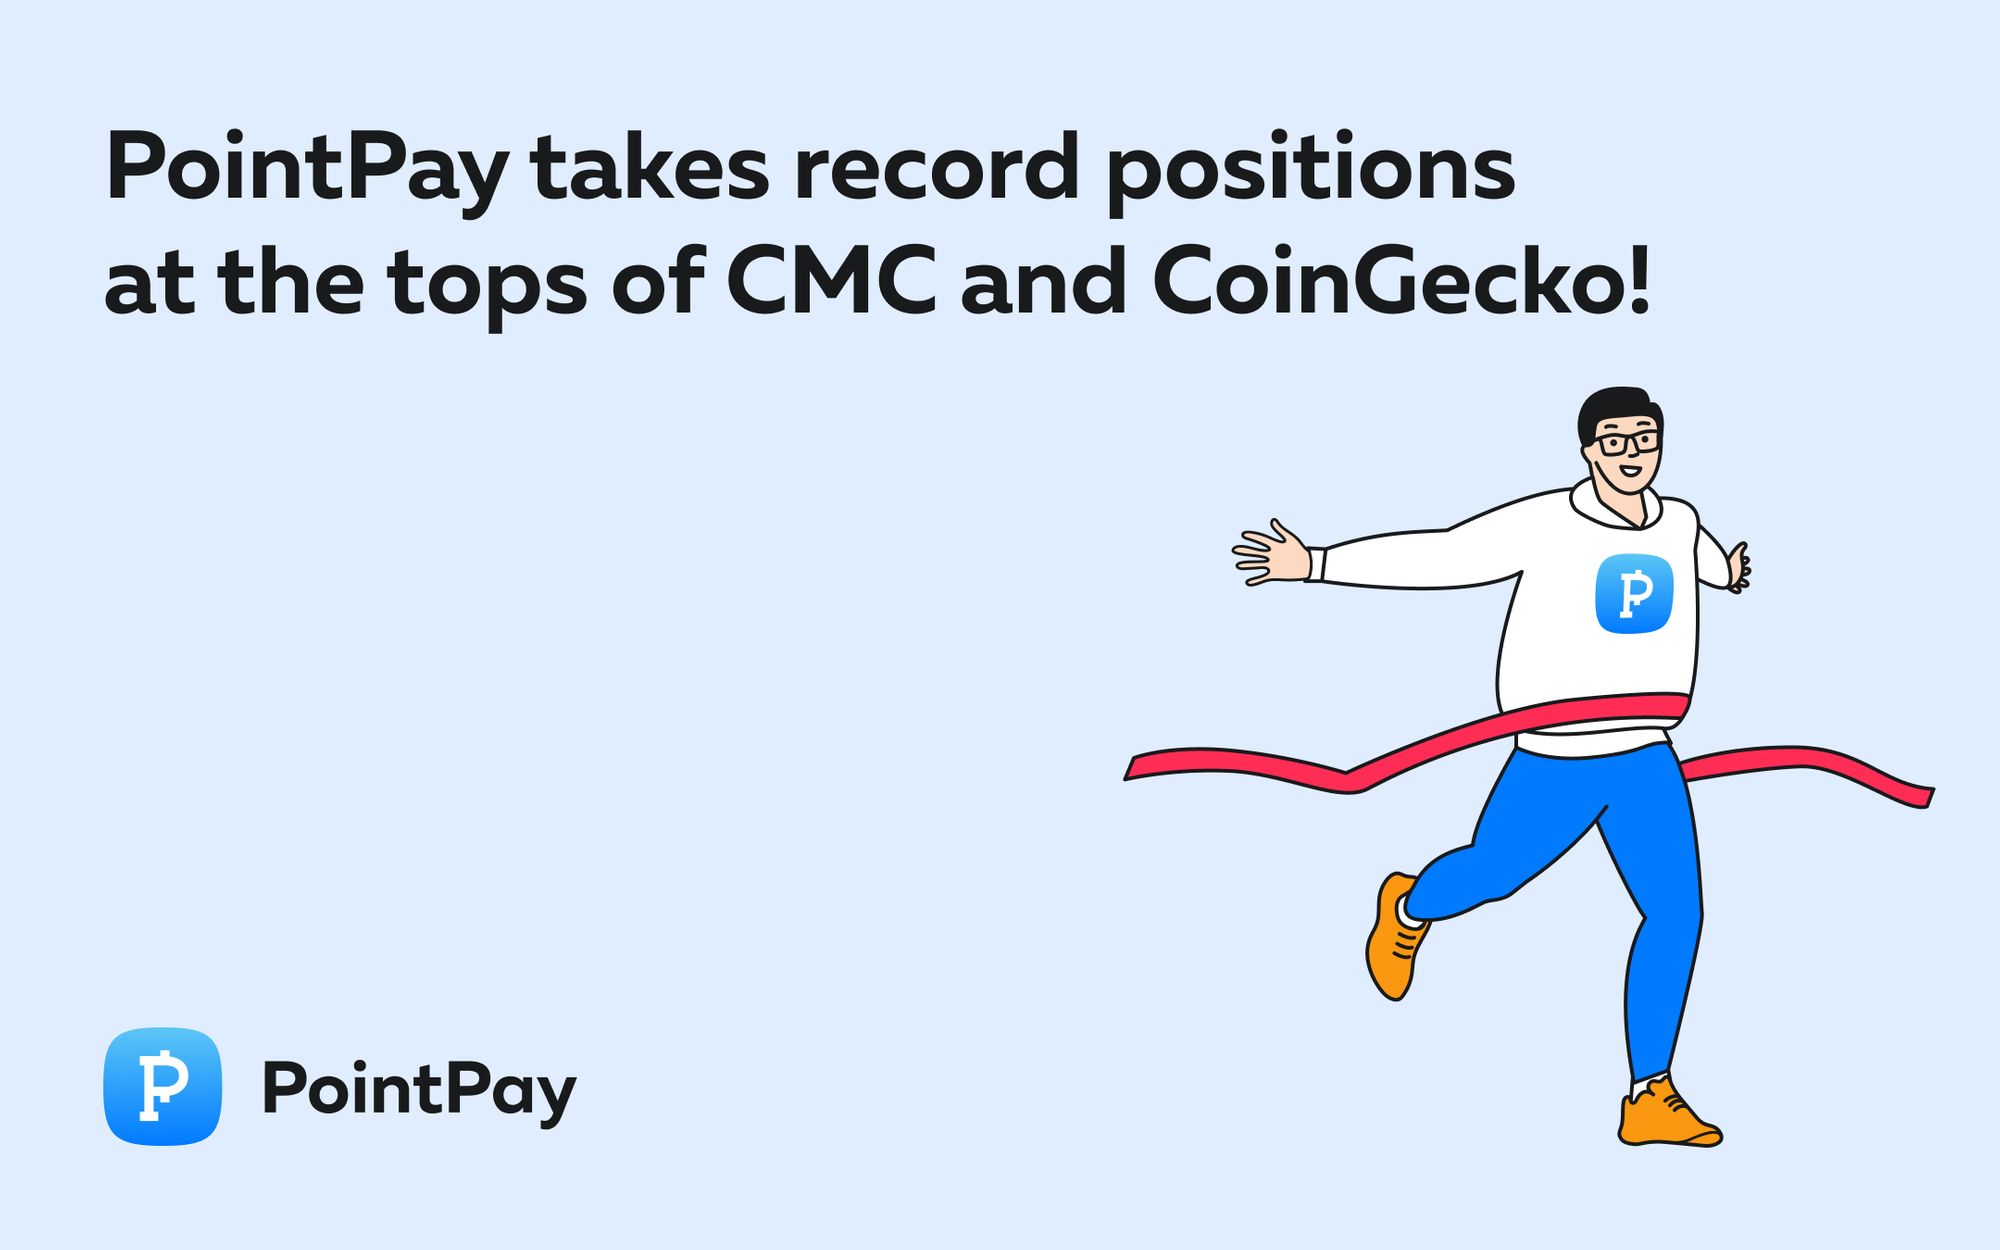 PointPay takes record positions at the tops of CMC and CoinGecko!